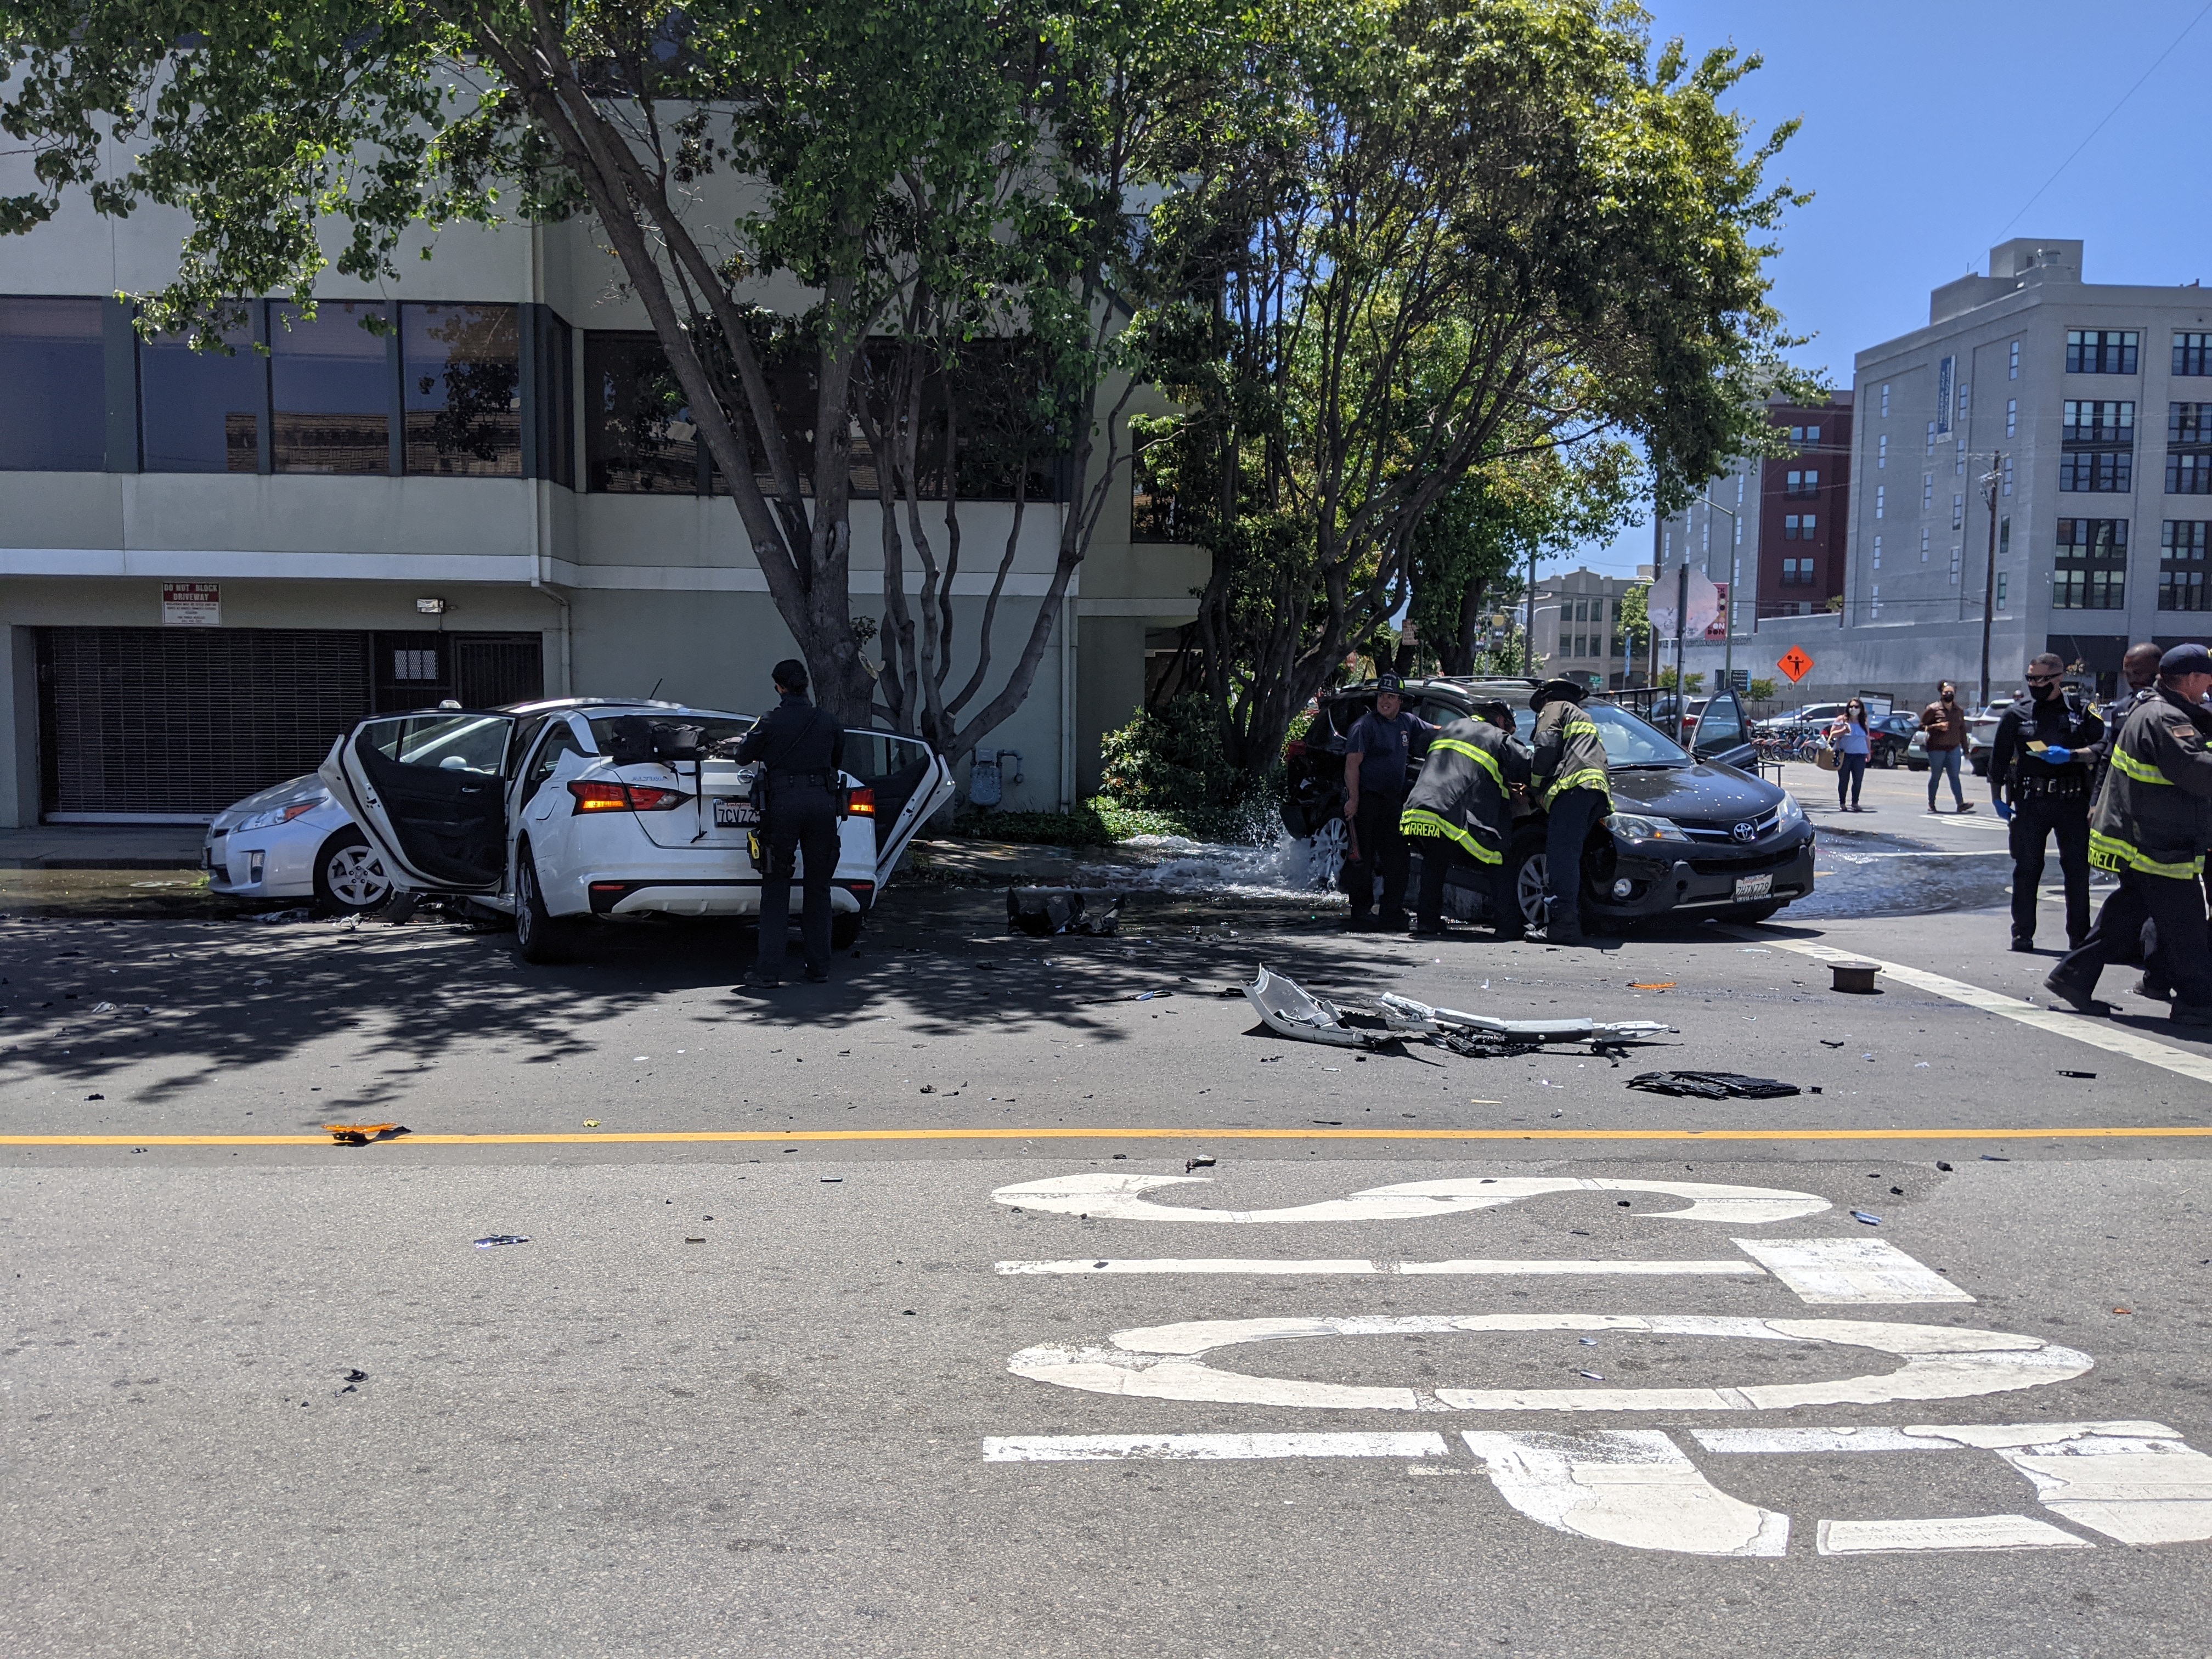 While OakDOT prepares to remove safety measures on Telegraph, the carnage continues. Example: this serious crash in Jack London that sent two children to the hospital. Photo: Streetsblog/Rudick